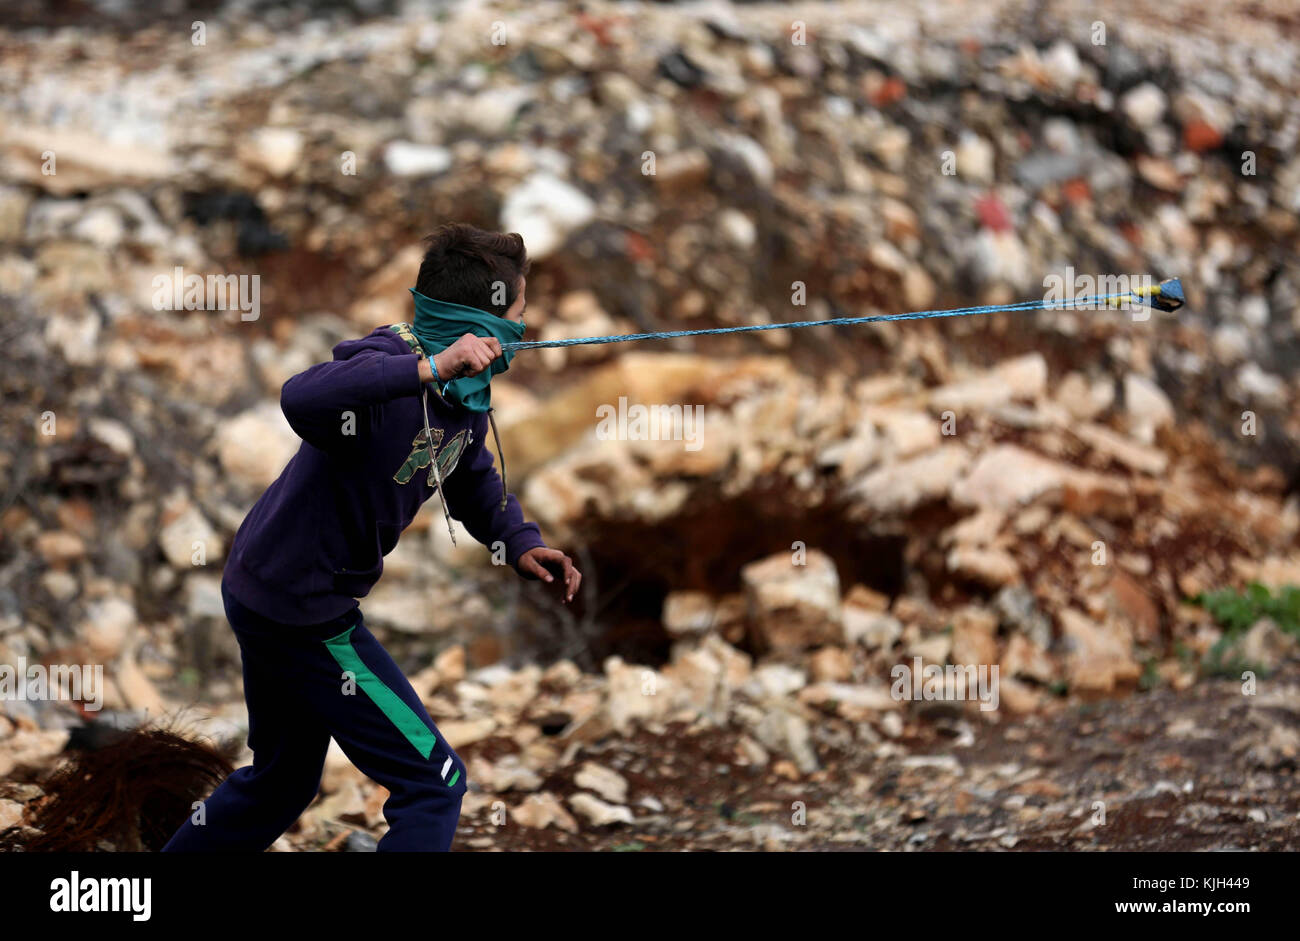 Nablus, West Bank, Palestinian Territory. 24th Nov, 2017. A Palestinian protester uses a slingshot to hurl stones towards Israeli security forces during clashes following a weekly demonstration against the expropriation of Palestinian land by Israel in the village of Kfar Qaddum, near Nablus in the occupied West Bank, on November 24, 2017 Credit: Shadi Jarar'Ah/APA Images/ZUMA Wire/Alamy Live News Stock Photo